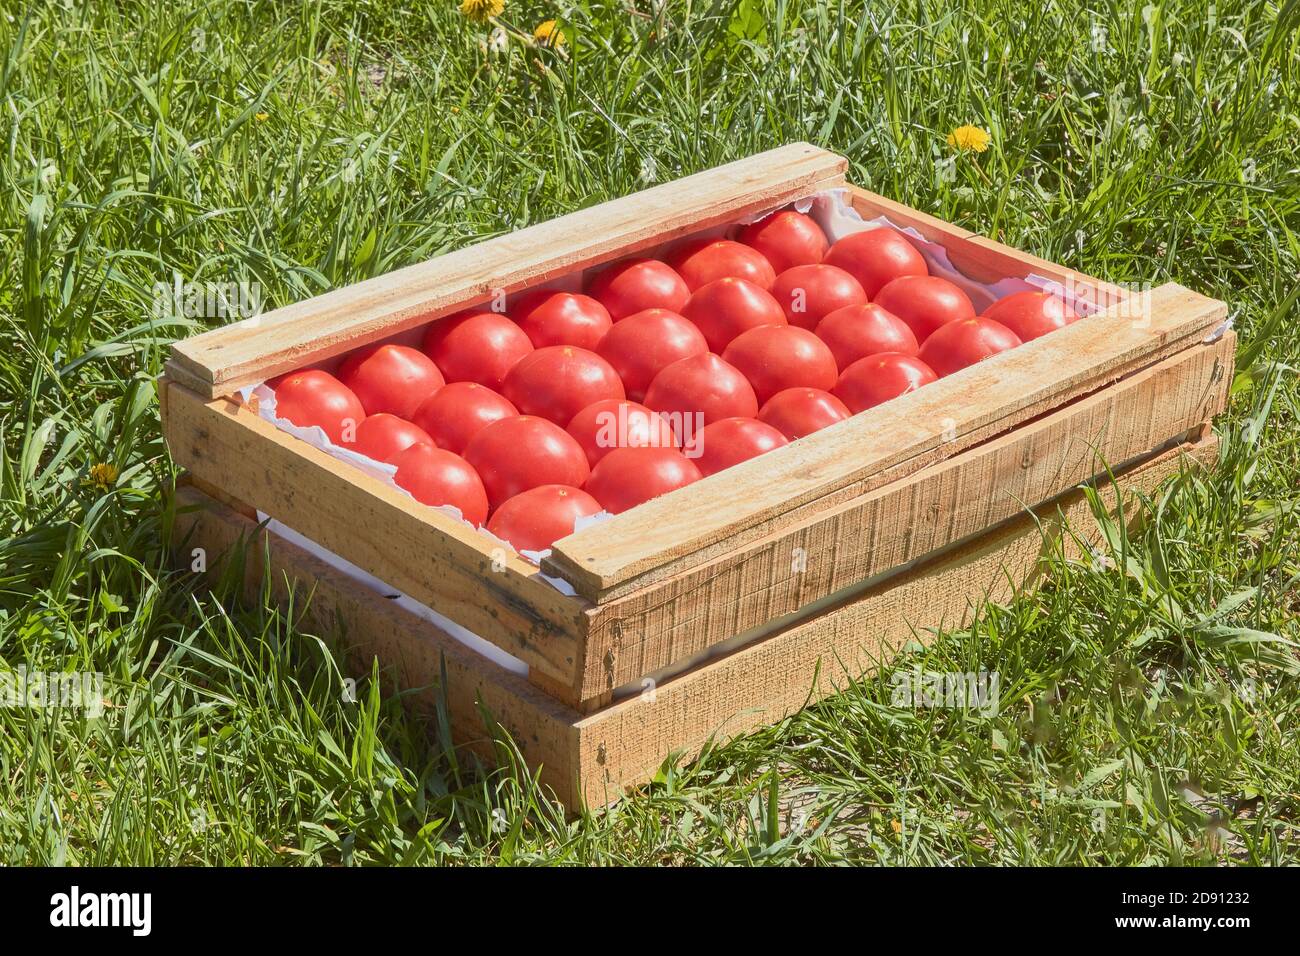 Sunny box of red ripe tomatoes on the grass Stock Photo